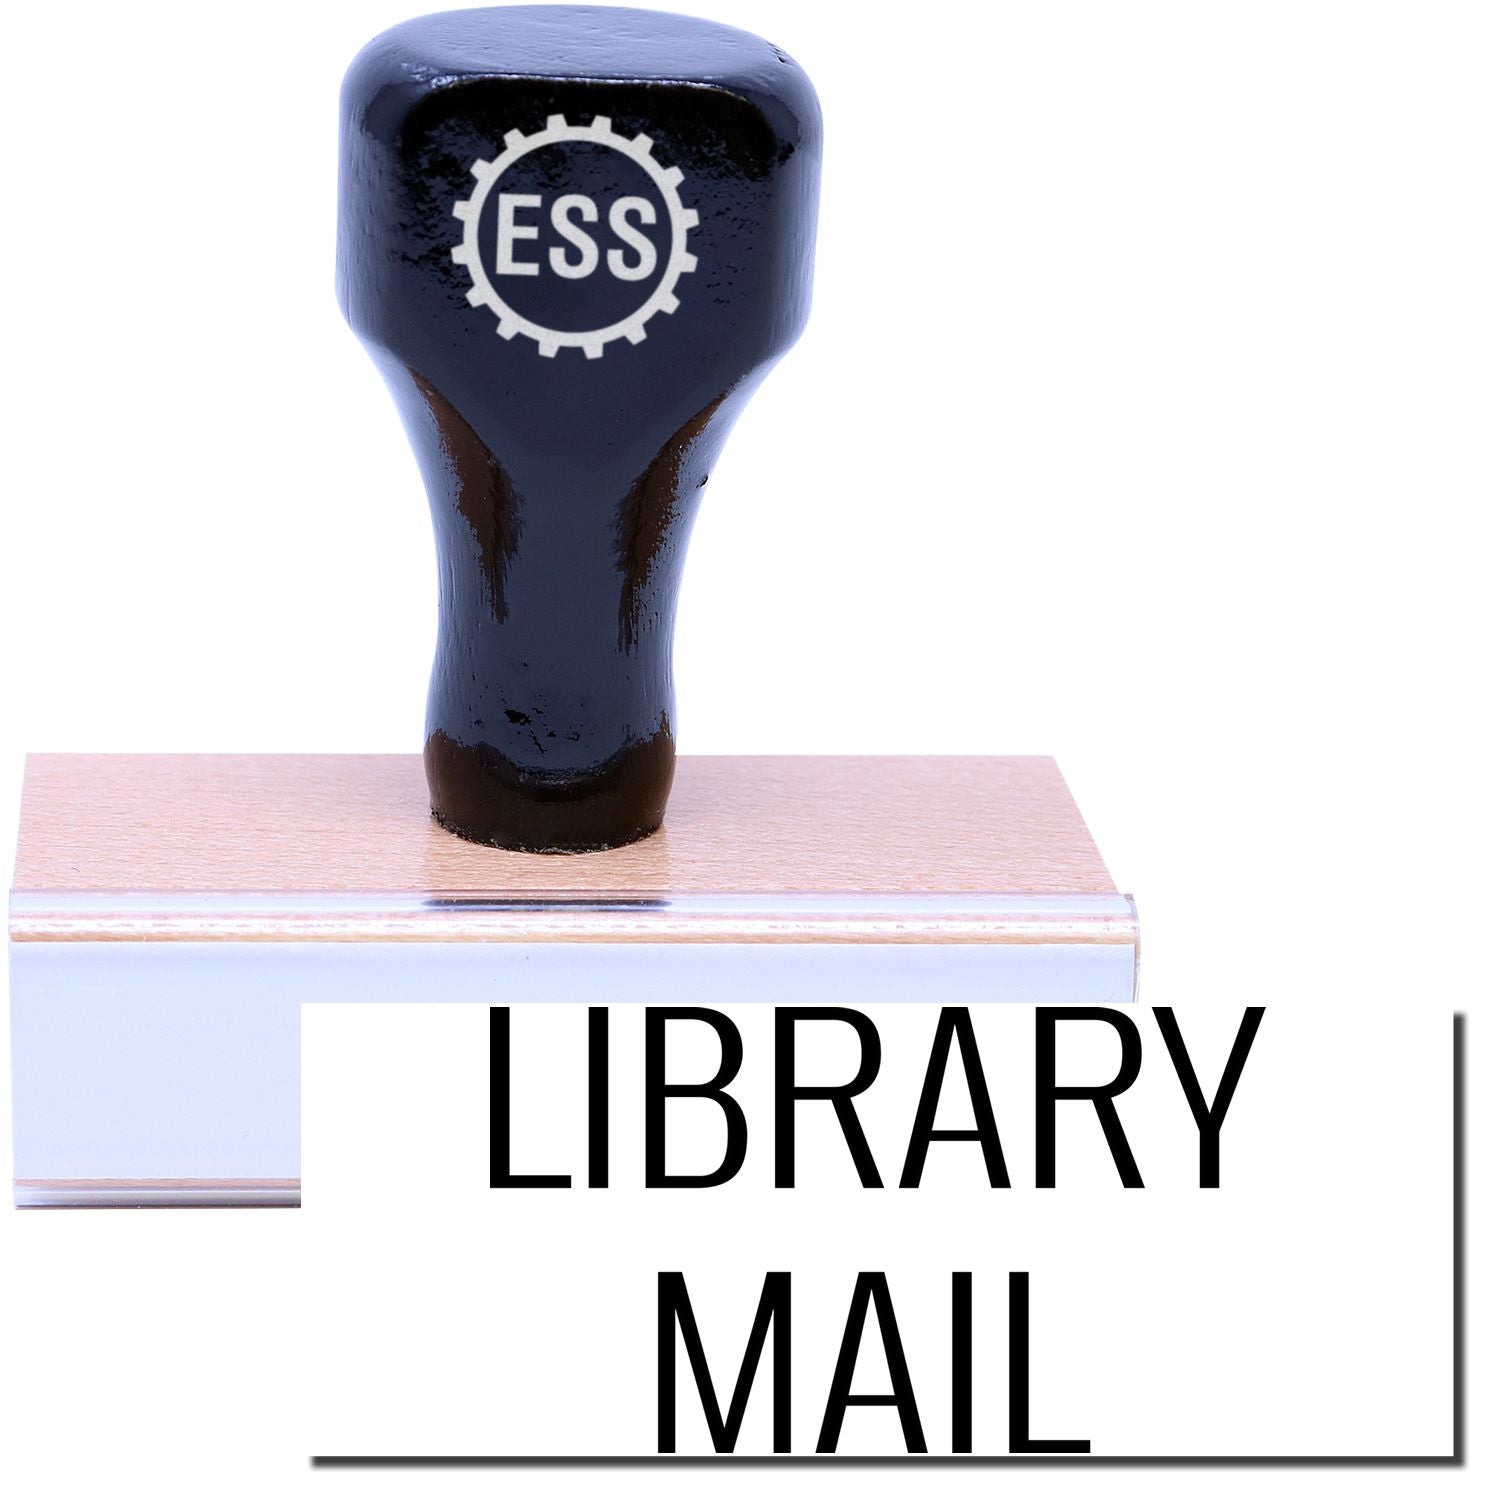 A stock office rubber stamp with a stamped image showing how the text "LIBRARY MAIL" in a large font is displayed after stamping.